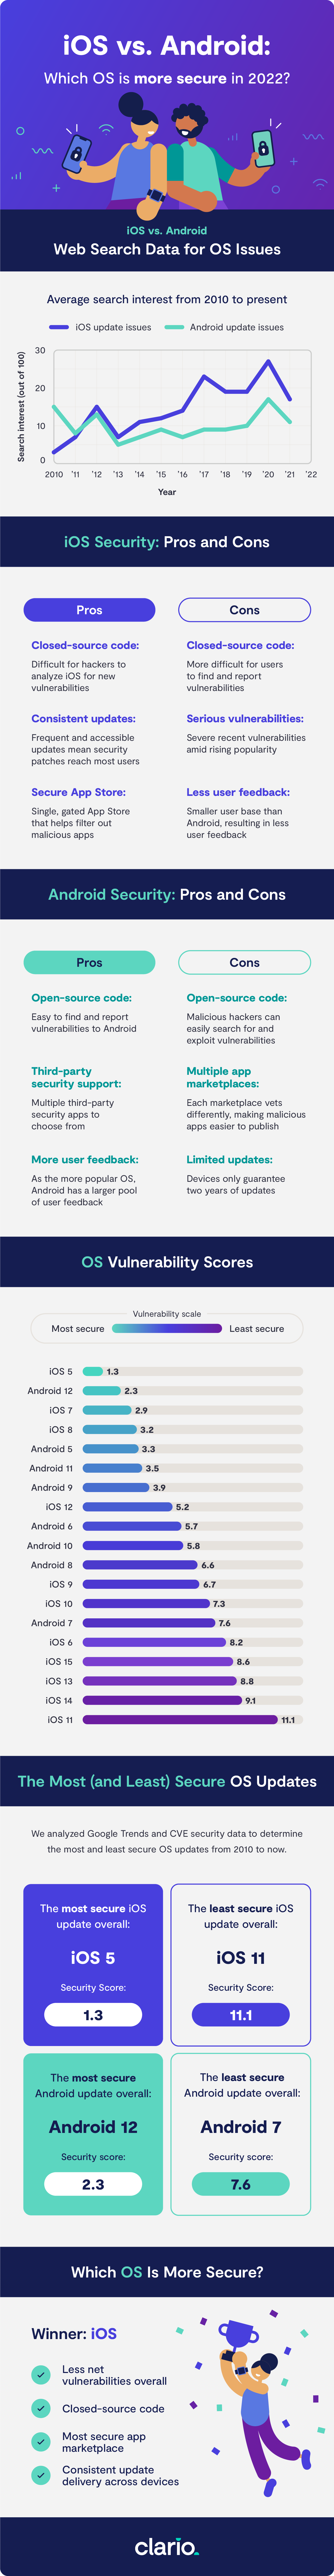 ios-vs-android-security-comparison-infographic.png